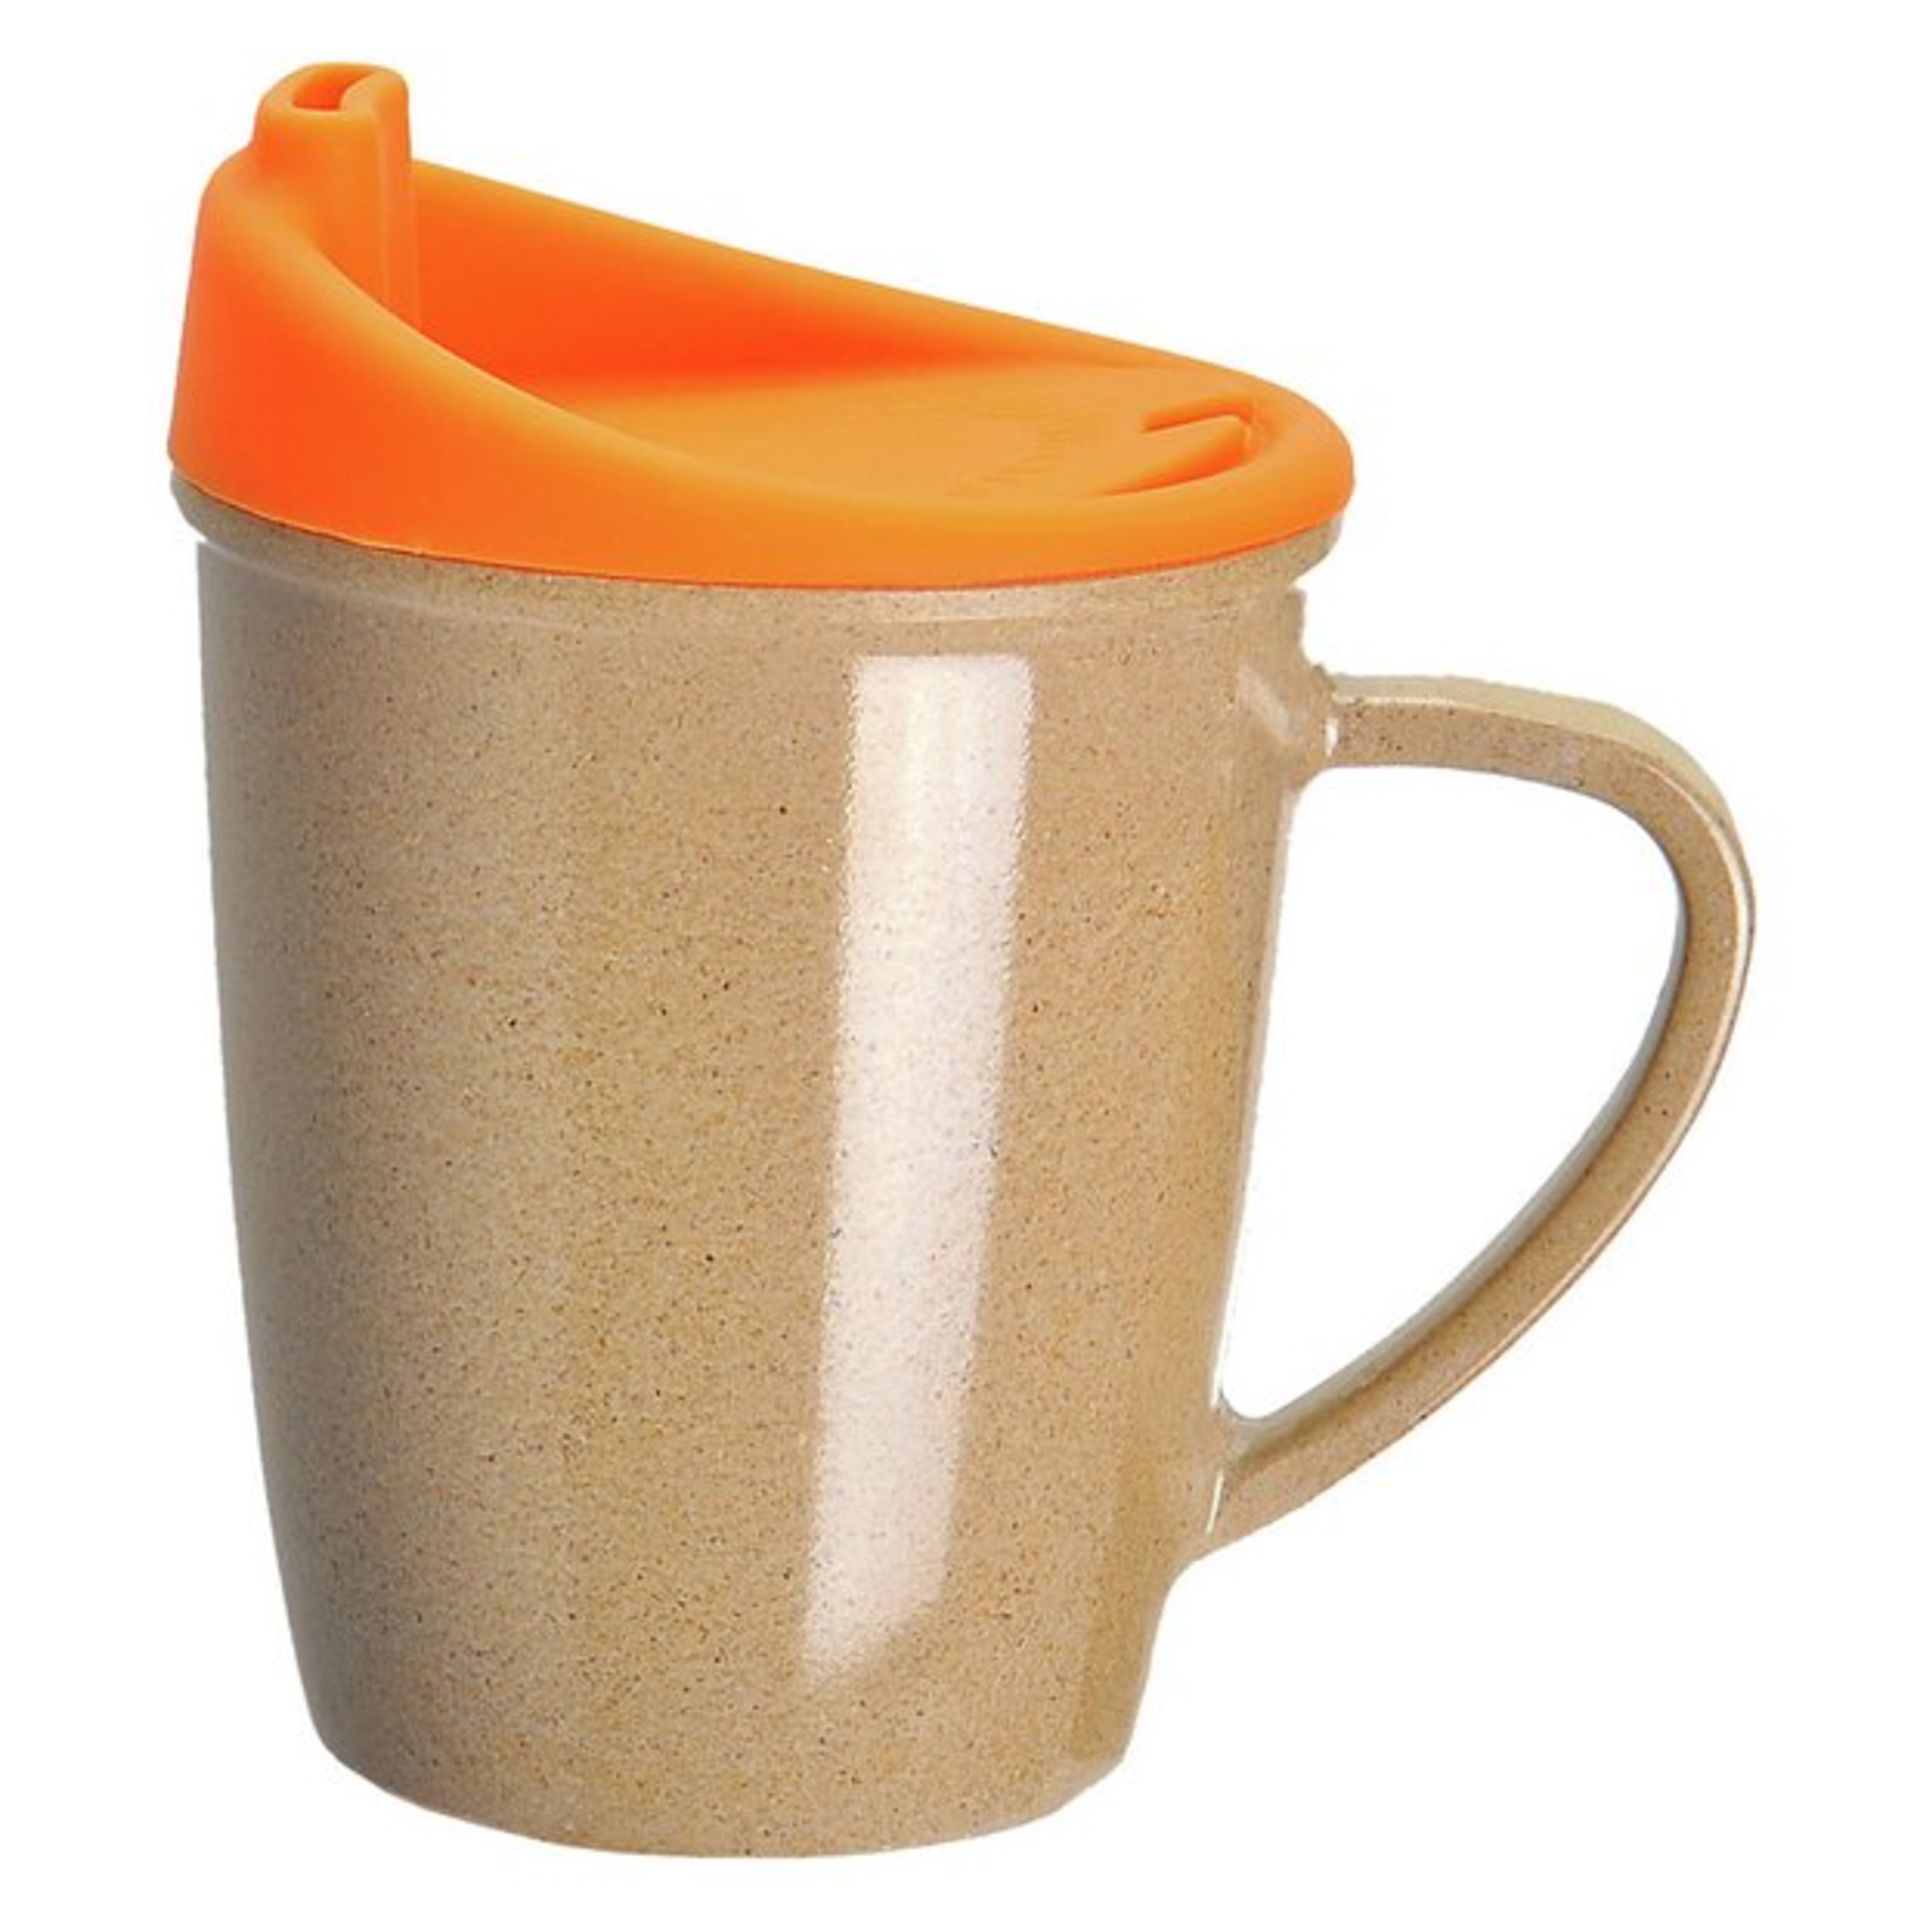 HUSK BABY CUP (DELIVERY BAND A)